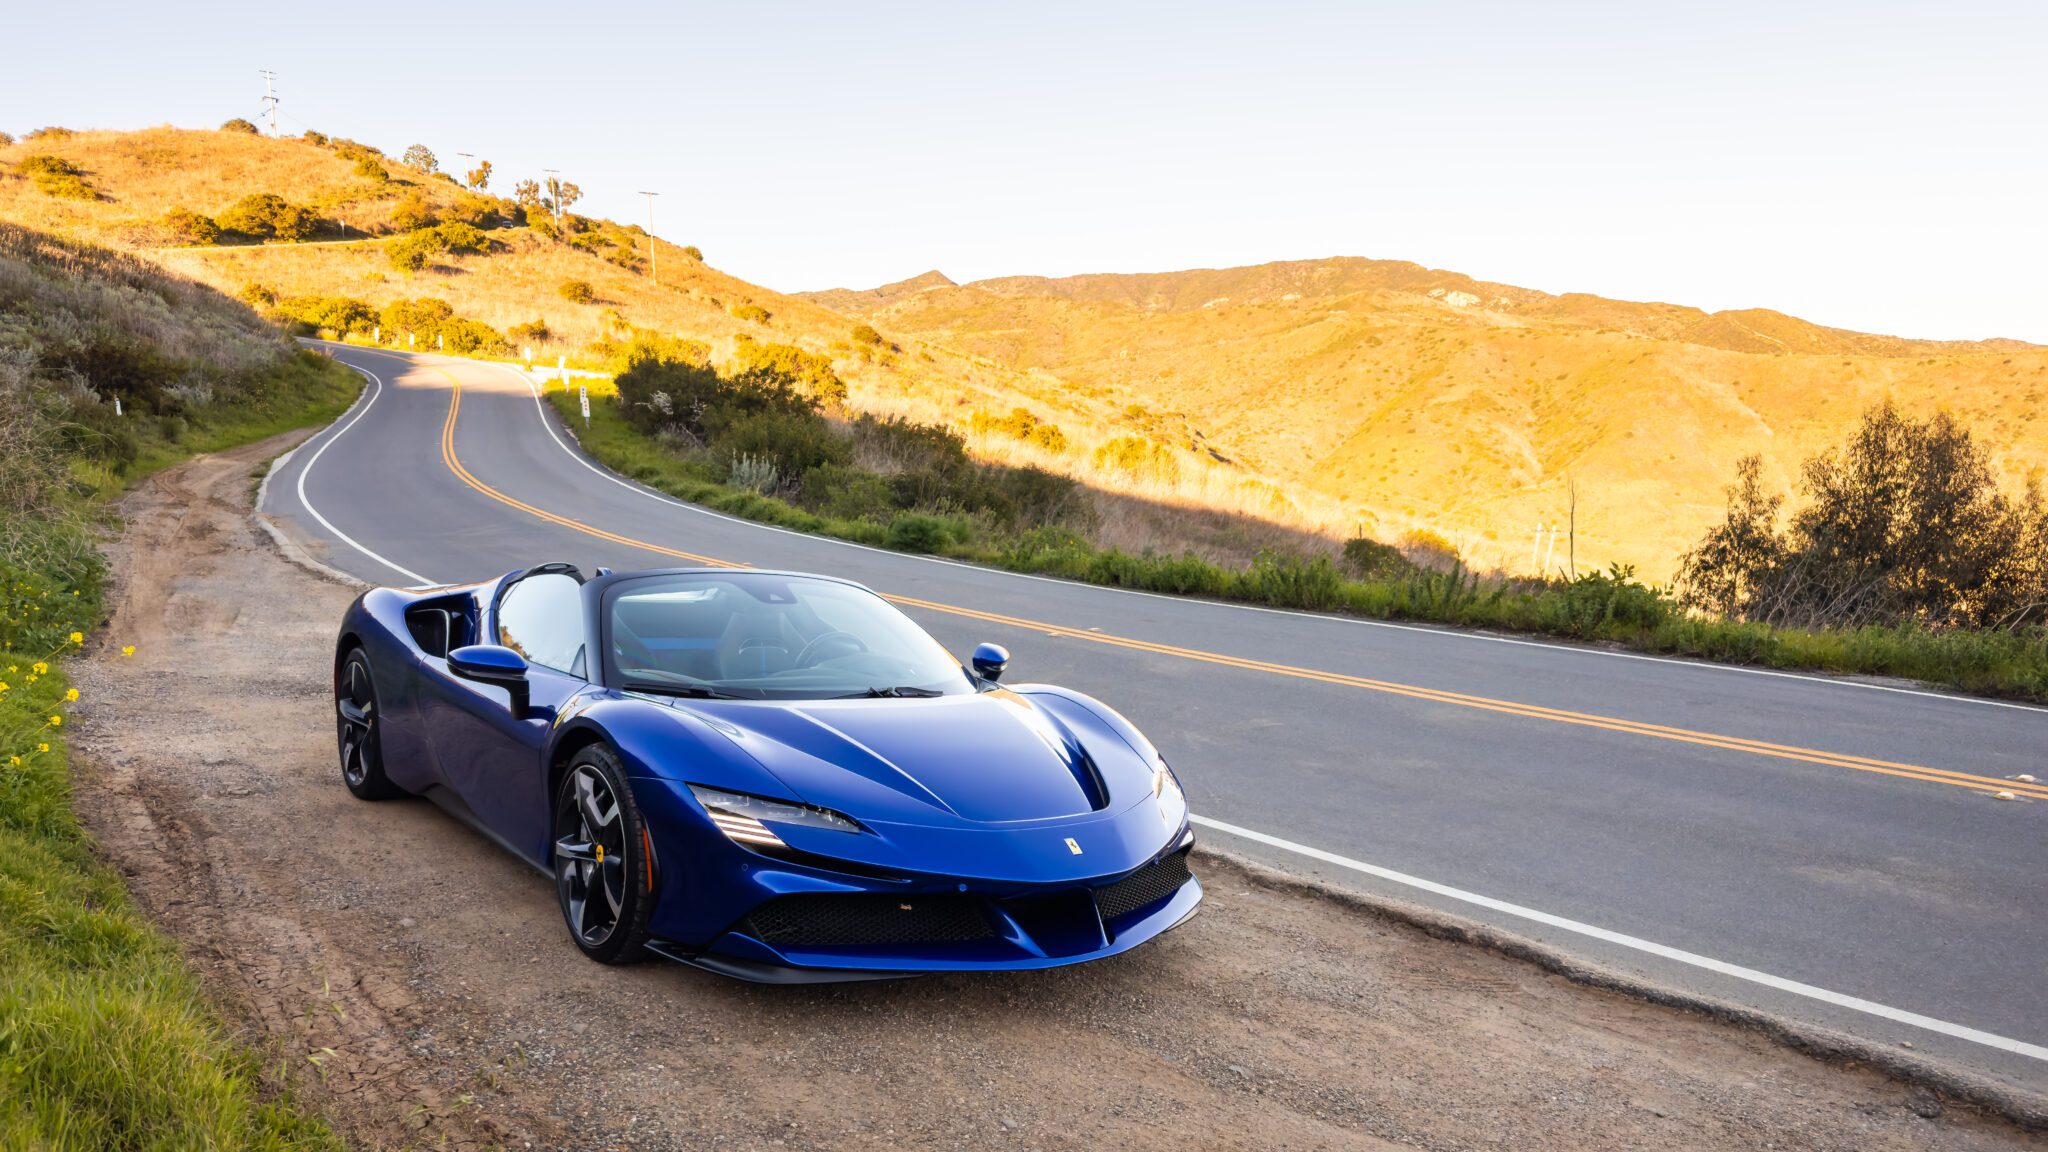 An image of a blue Ferrari SF90 Spider parked outdoors.